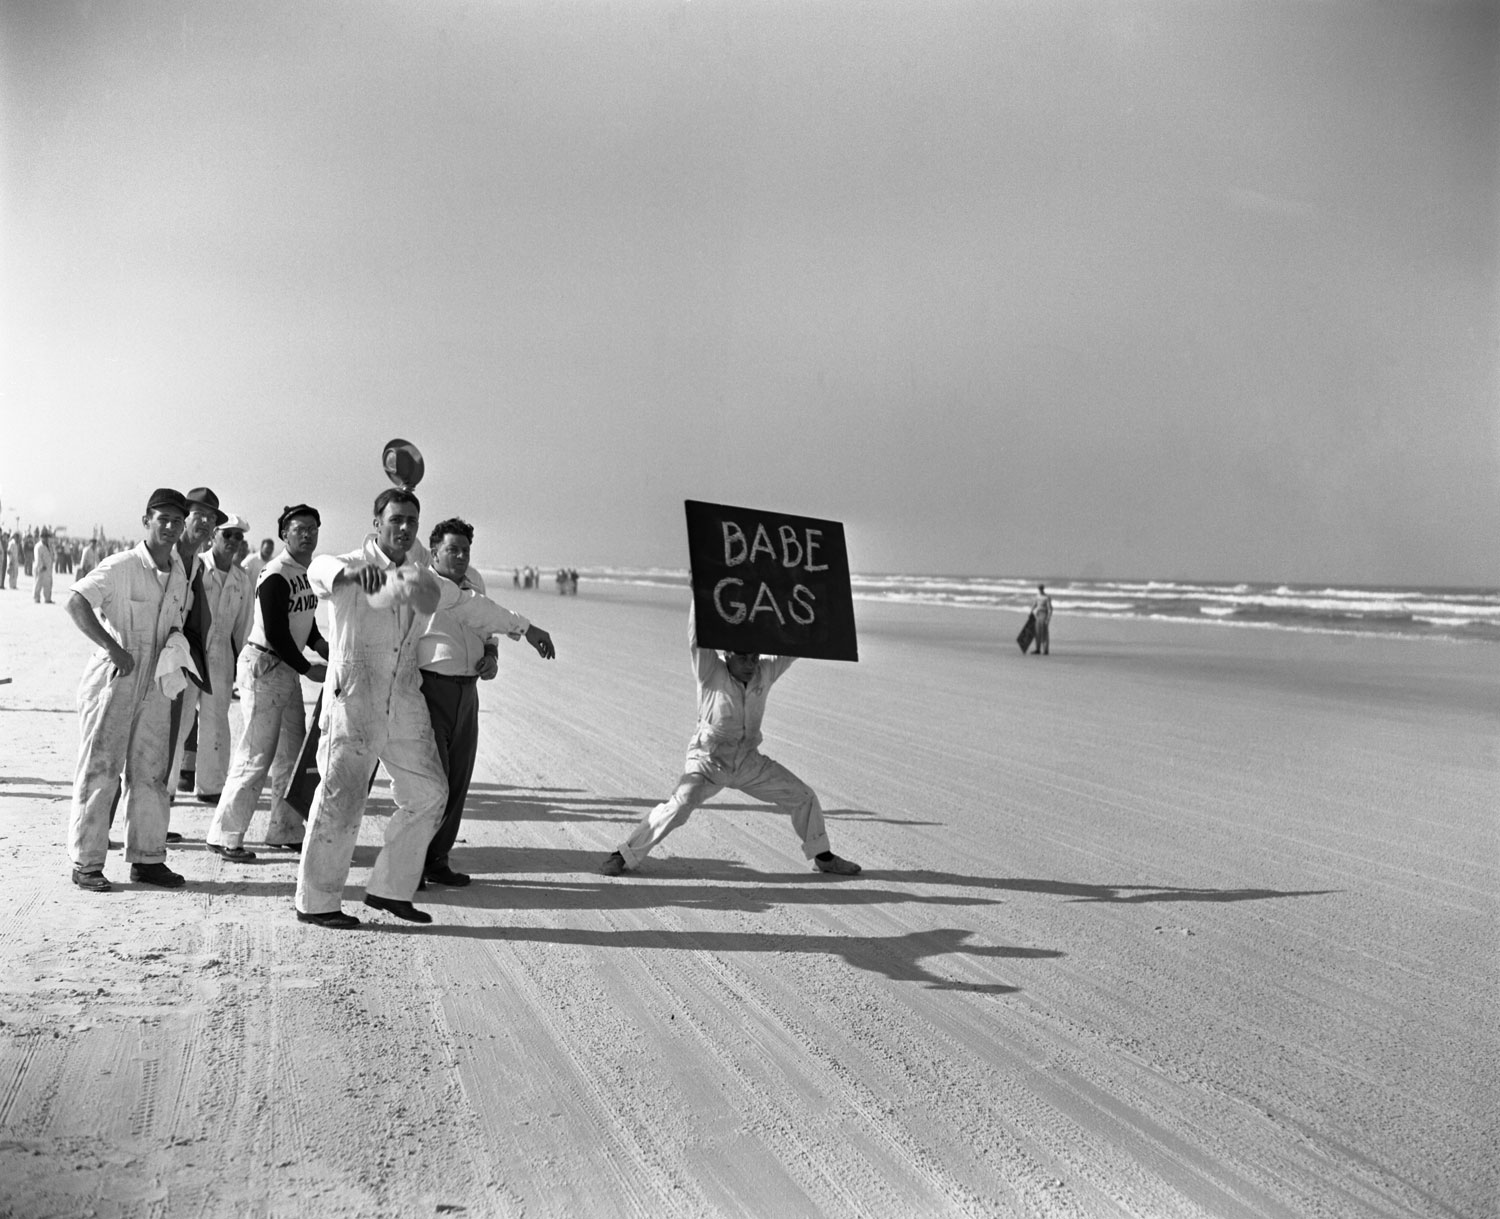 Spectators on the sidelines during the Daytona 200 in Daytona Beach, Florida, March 1948. One man holds up a sign reading 'Babe Gas'.